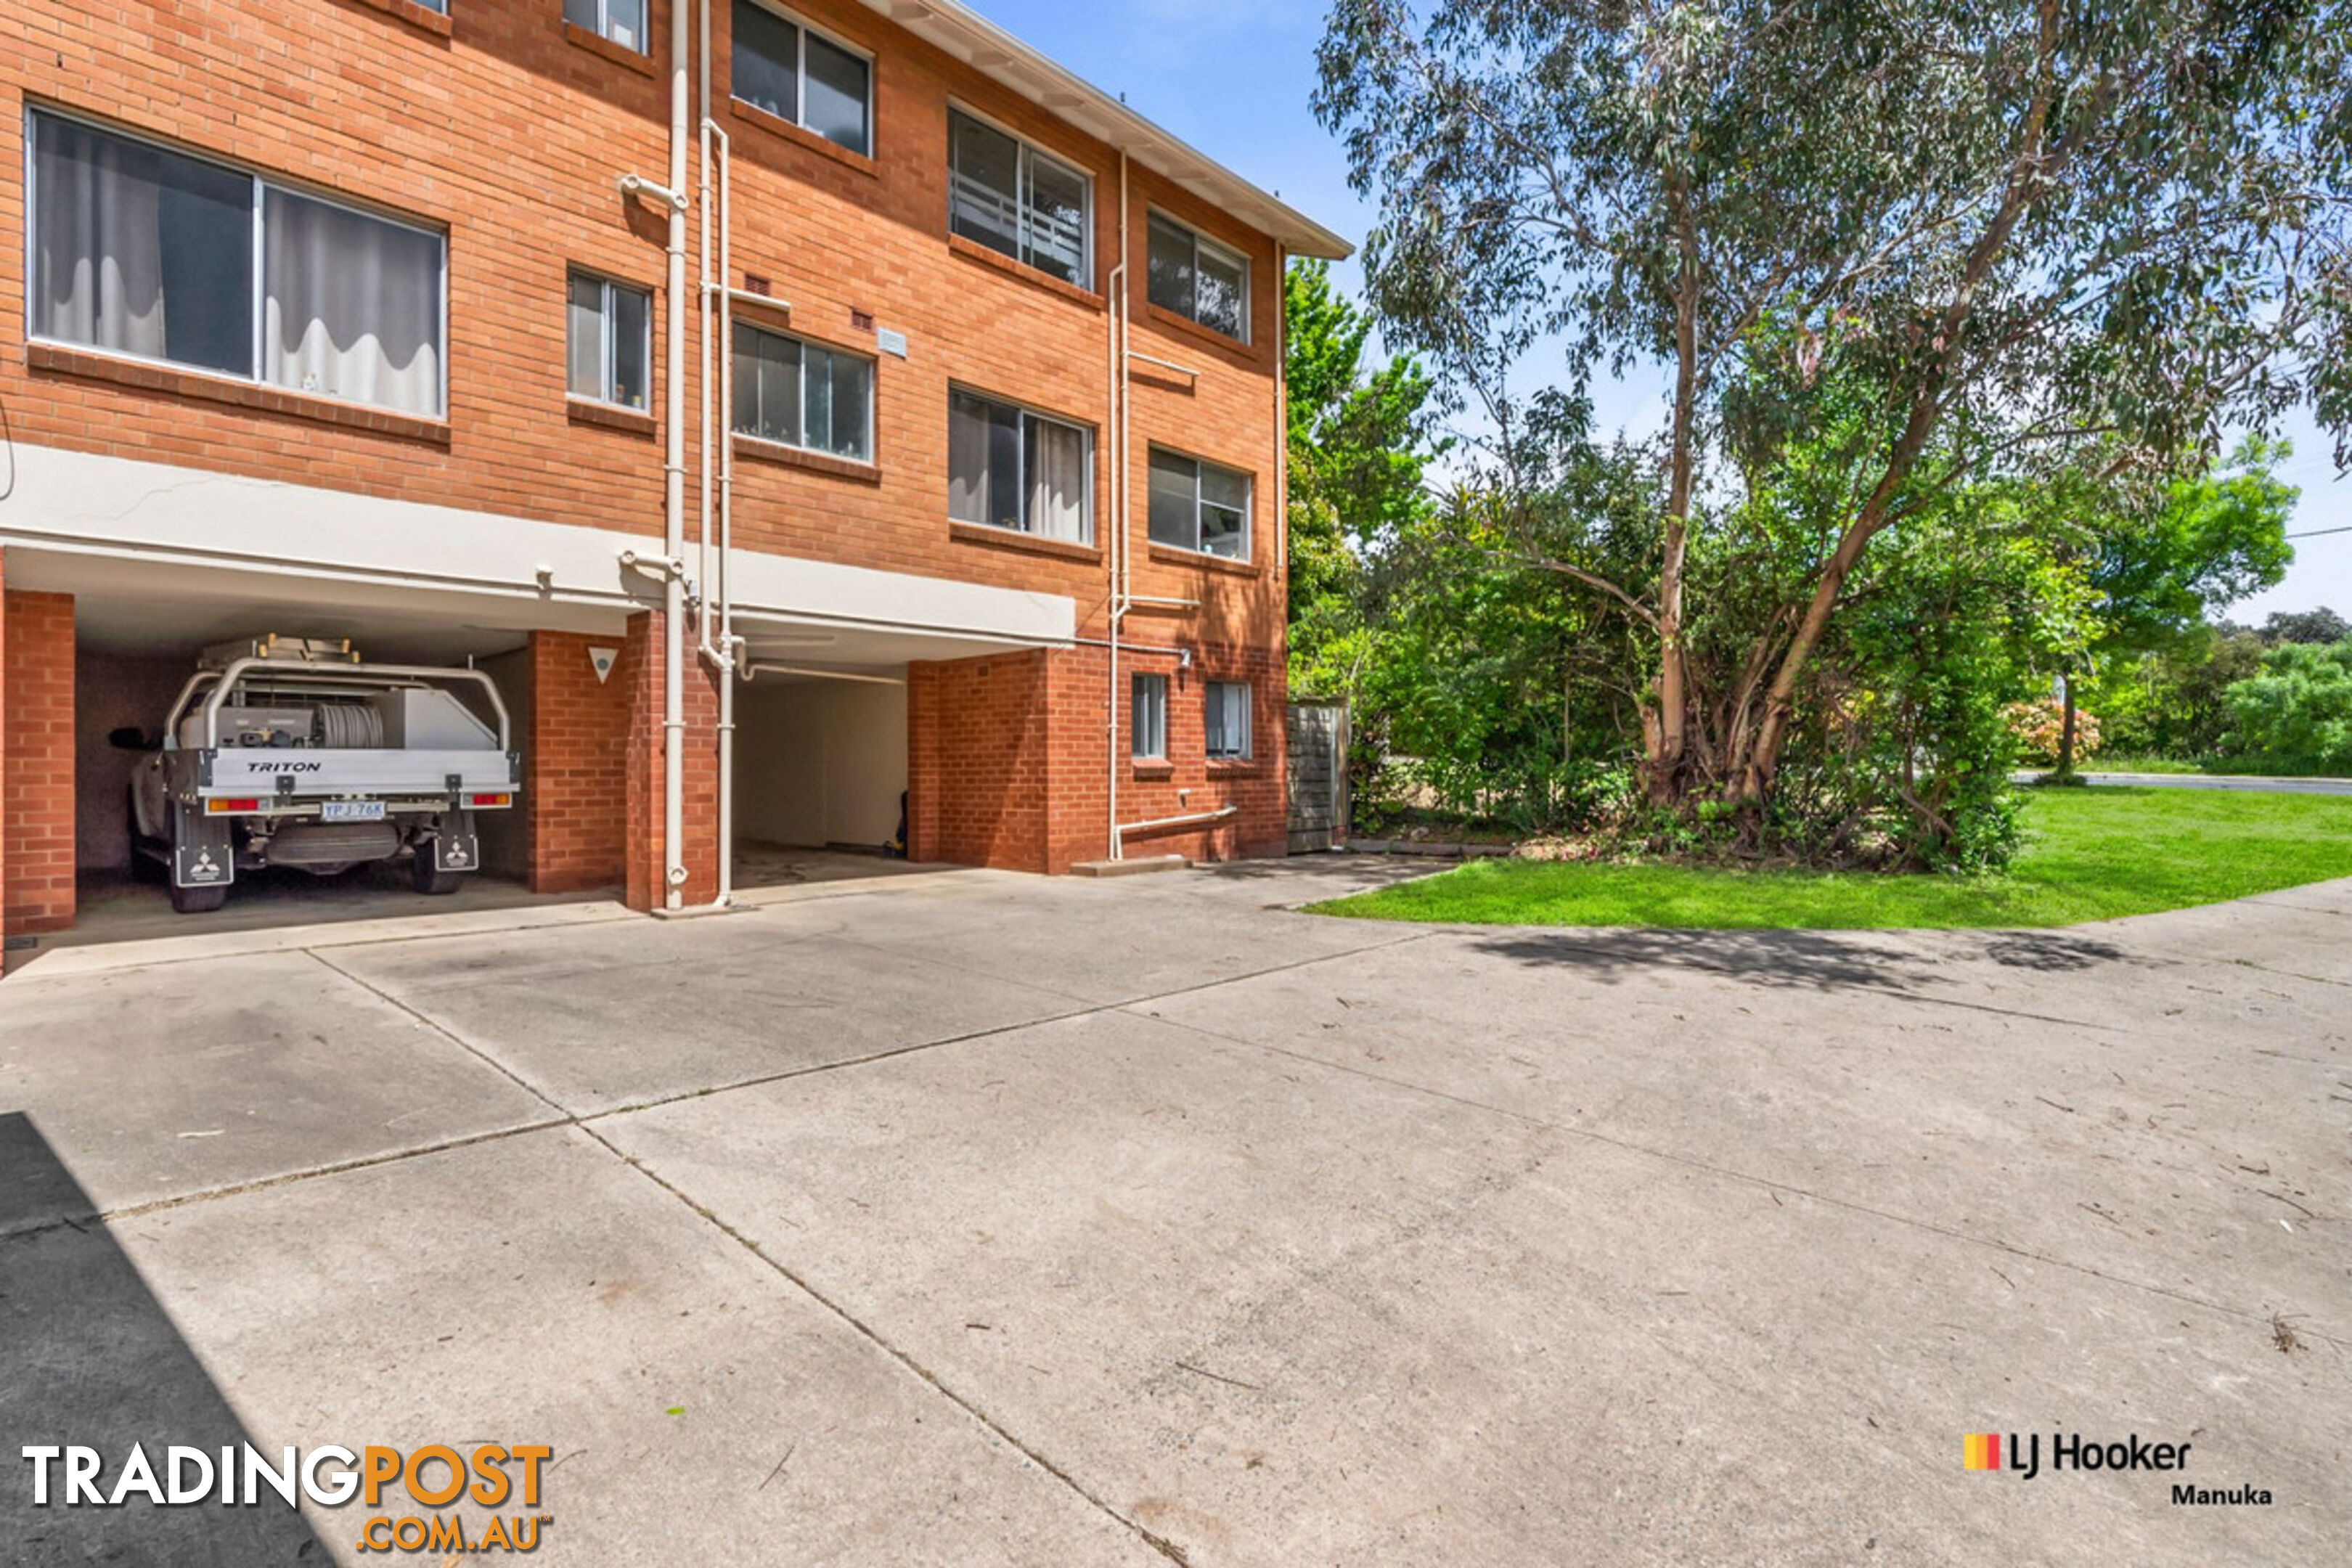 208-210 La Perouse Street RED HILL ACT 2603